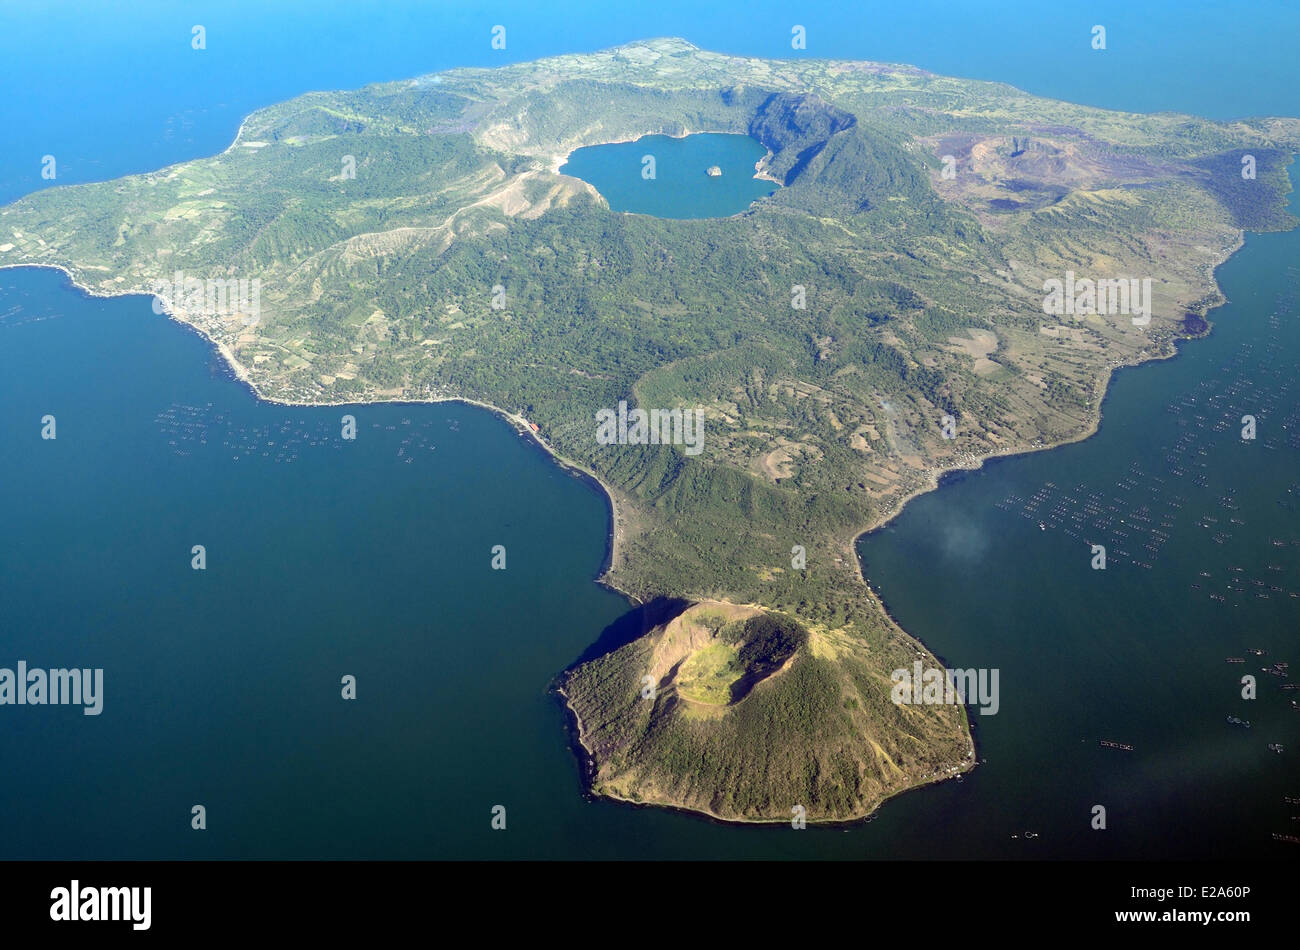 Philippines, Luzon island, the island and the vulcano of Taal